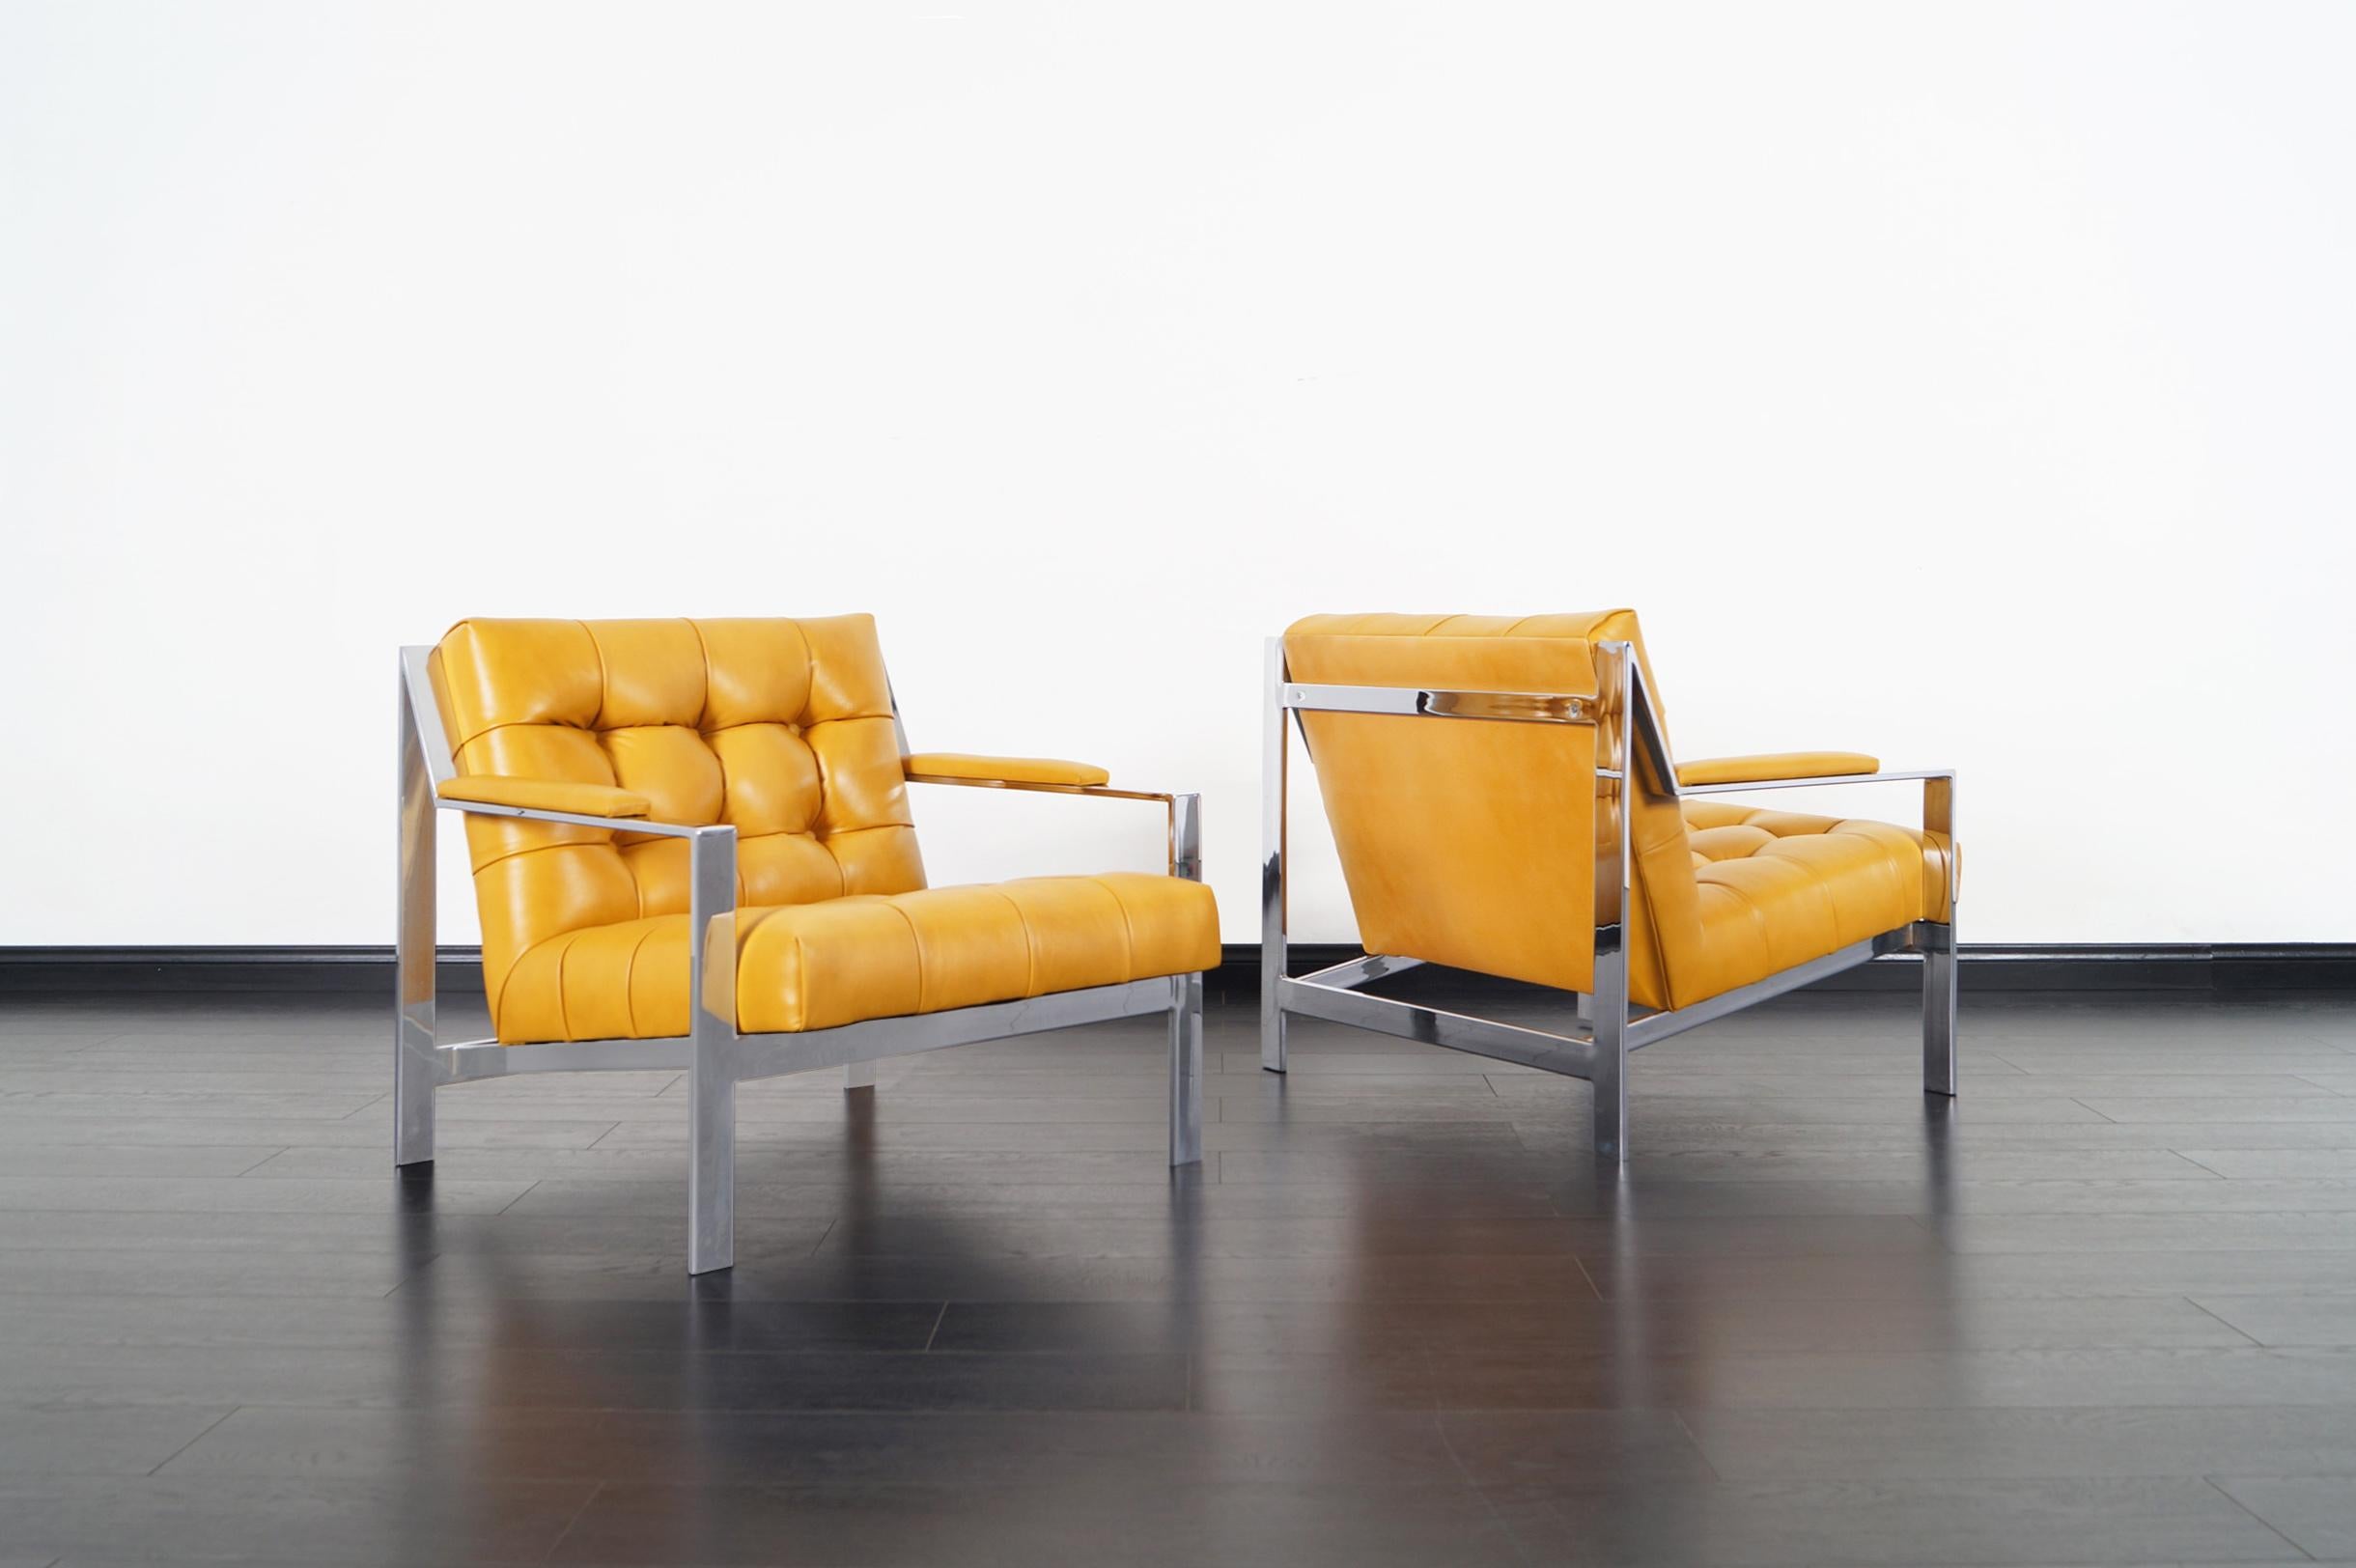 Stunning pair of vintage chrome lounge chairs designed by Cy Mann manufactured in the United States, circa 1970s. Features a fully chromed frame that stands out for its elegant architecture and sleek design. These chairs are really comfortable